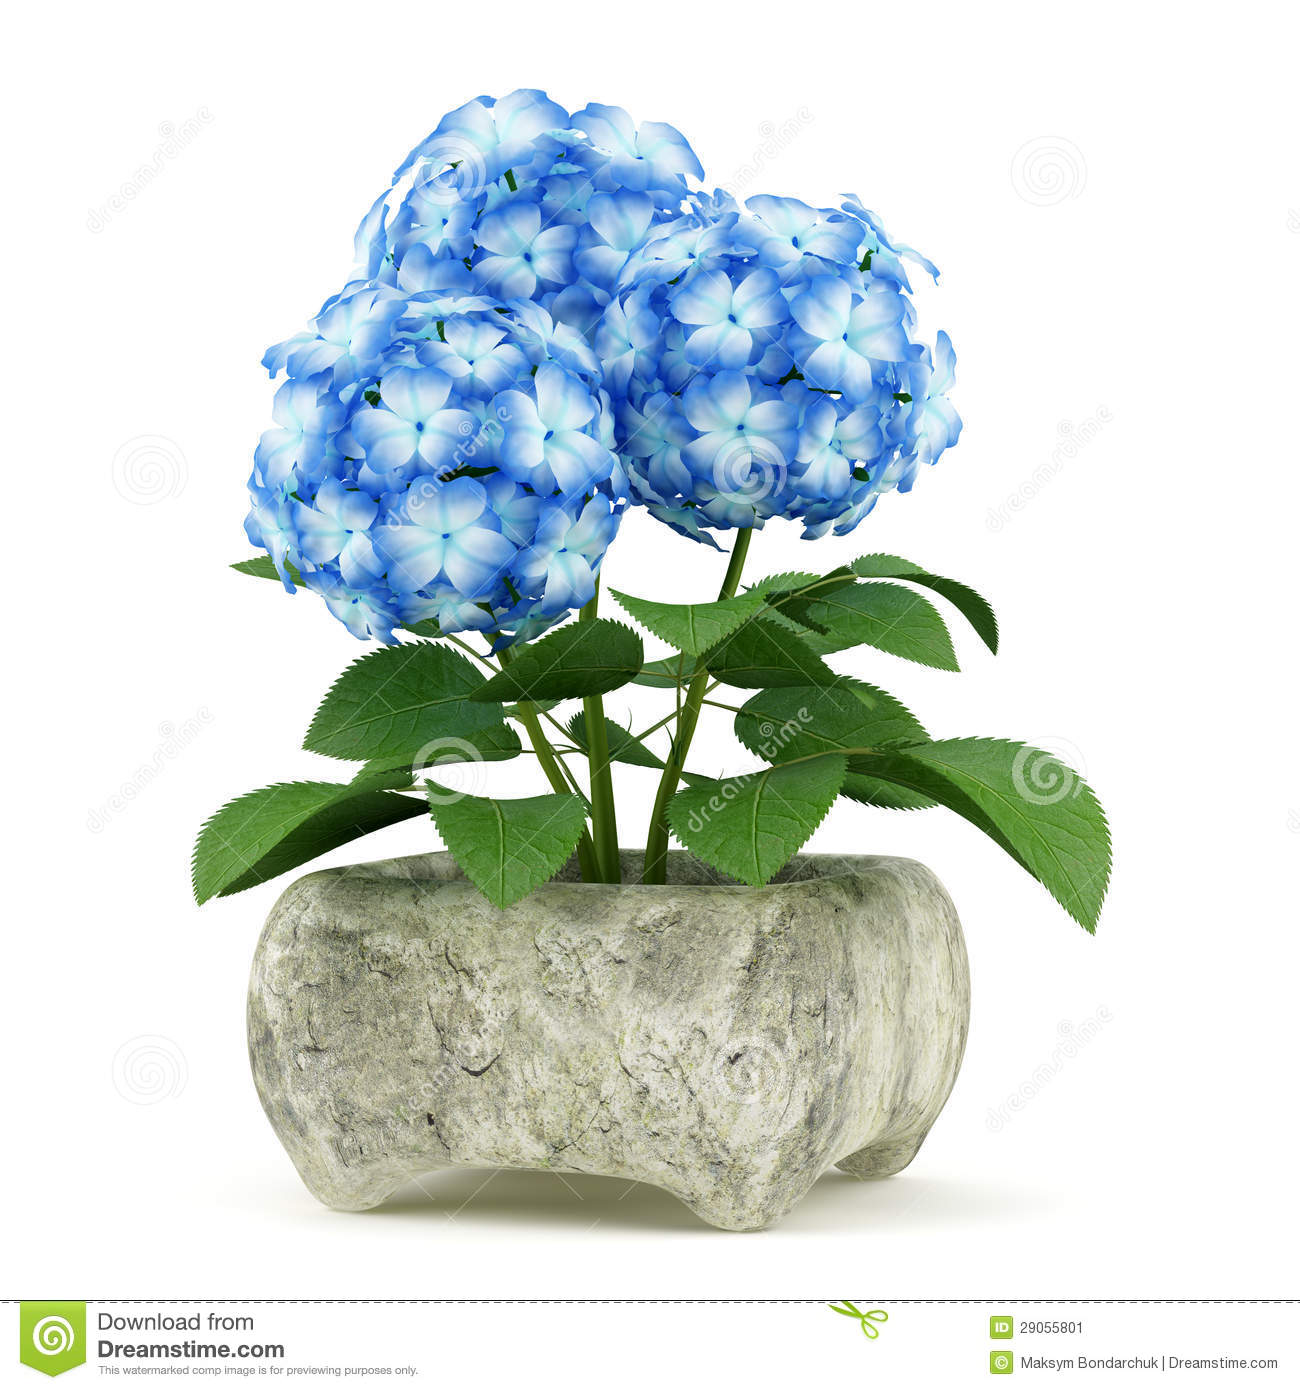 Blue Flower In Stone Pot On White Stock Image   Image  29055801